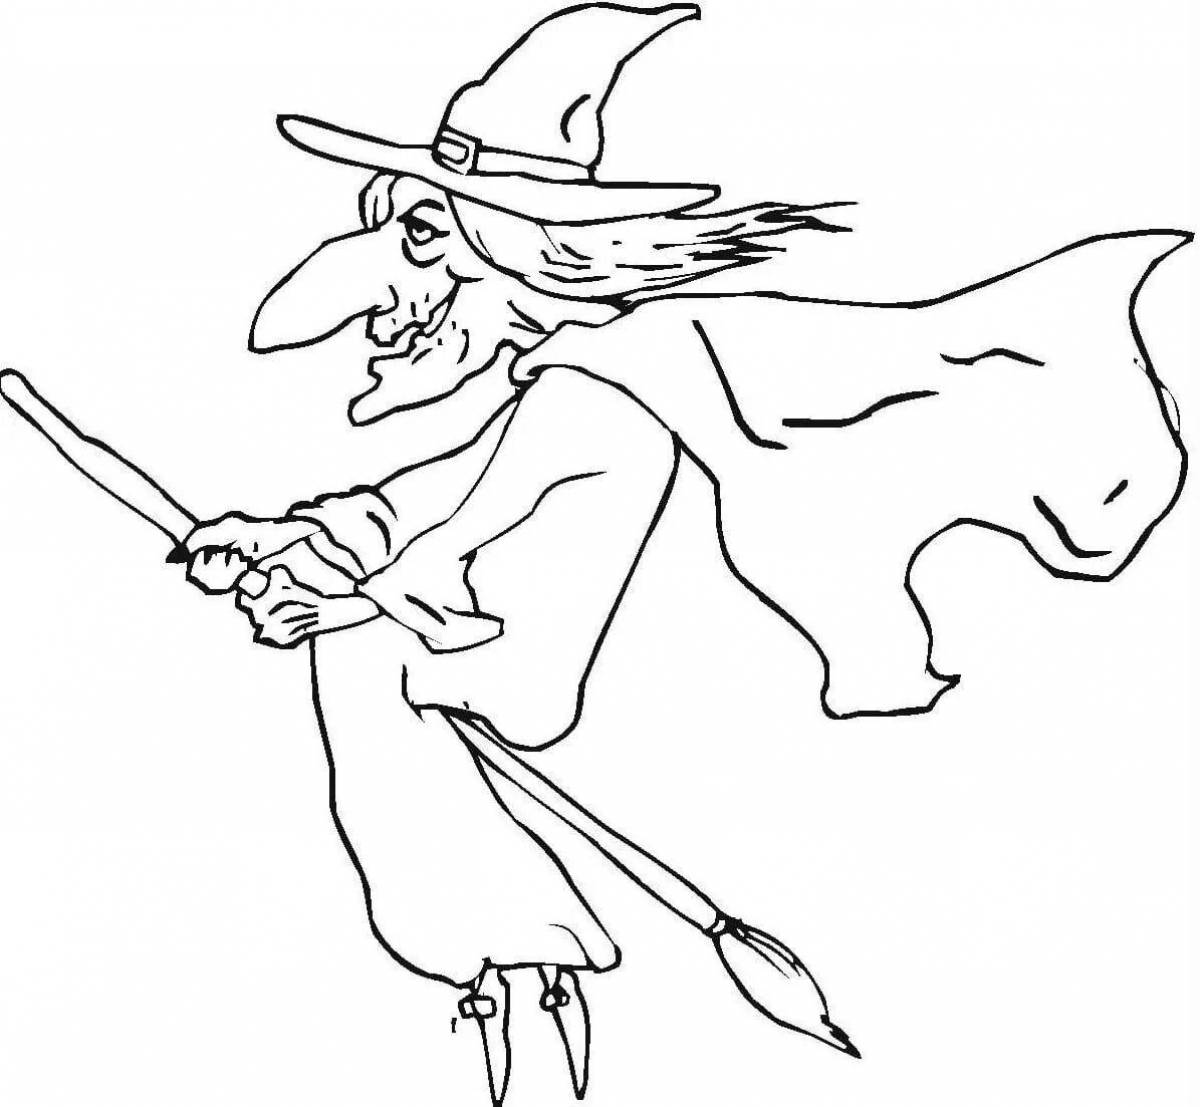 Fantastic coloring book for real witches